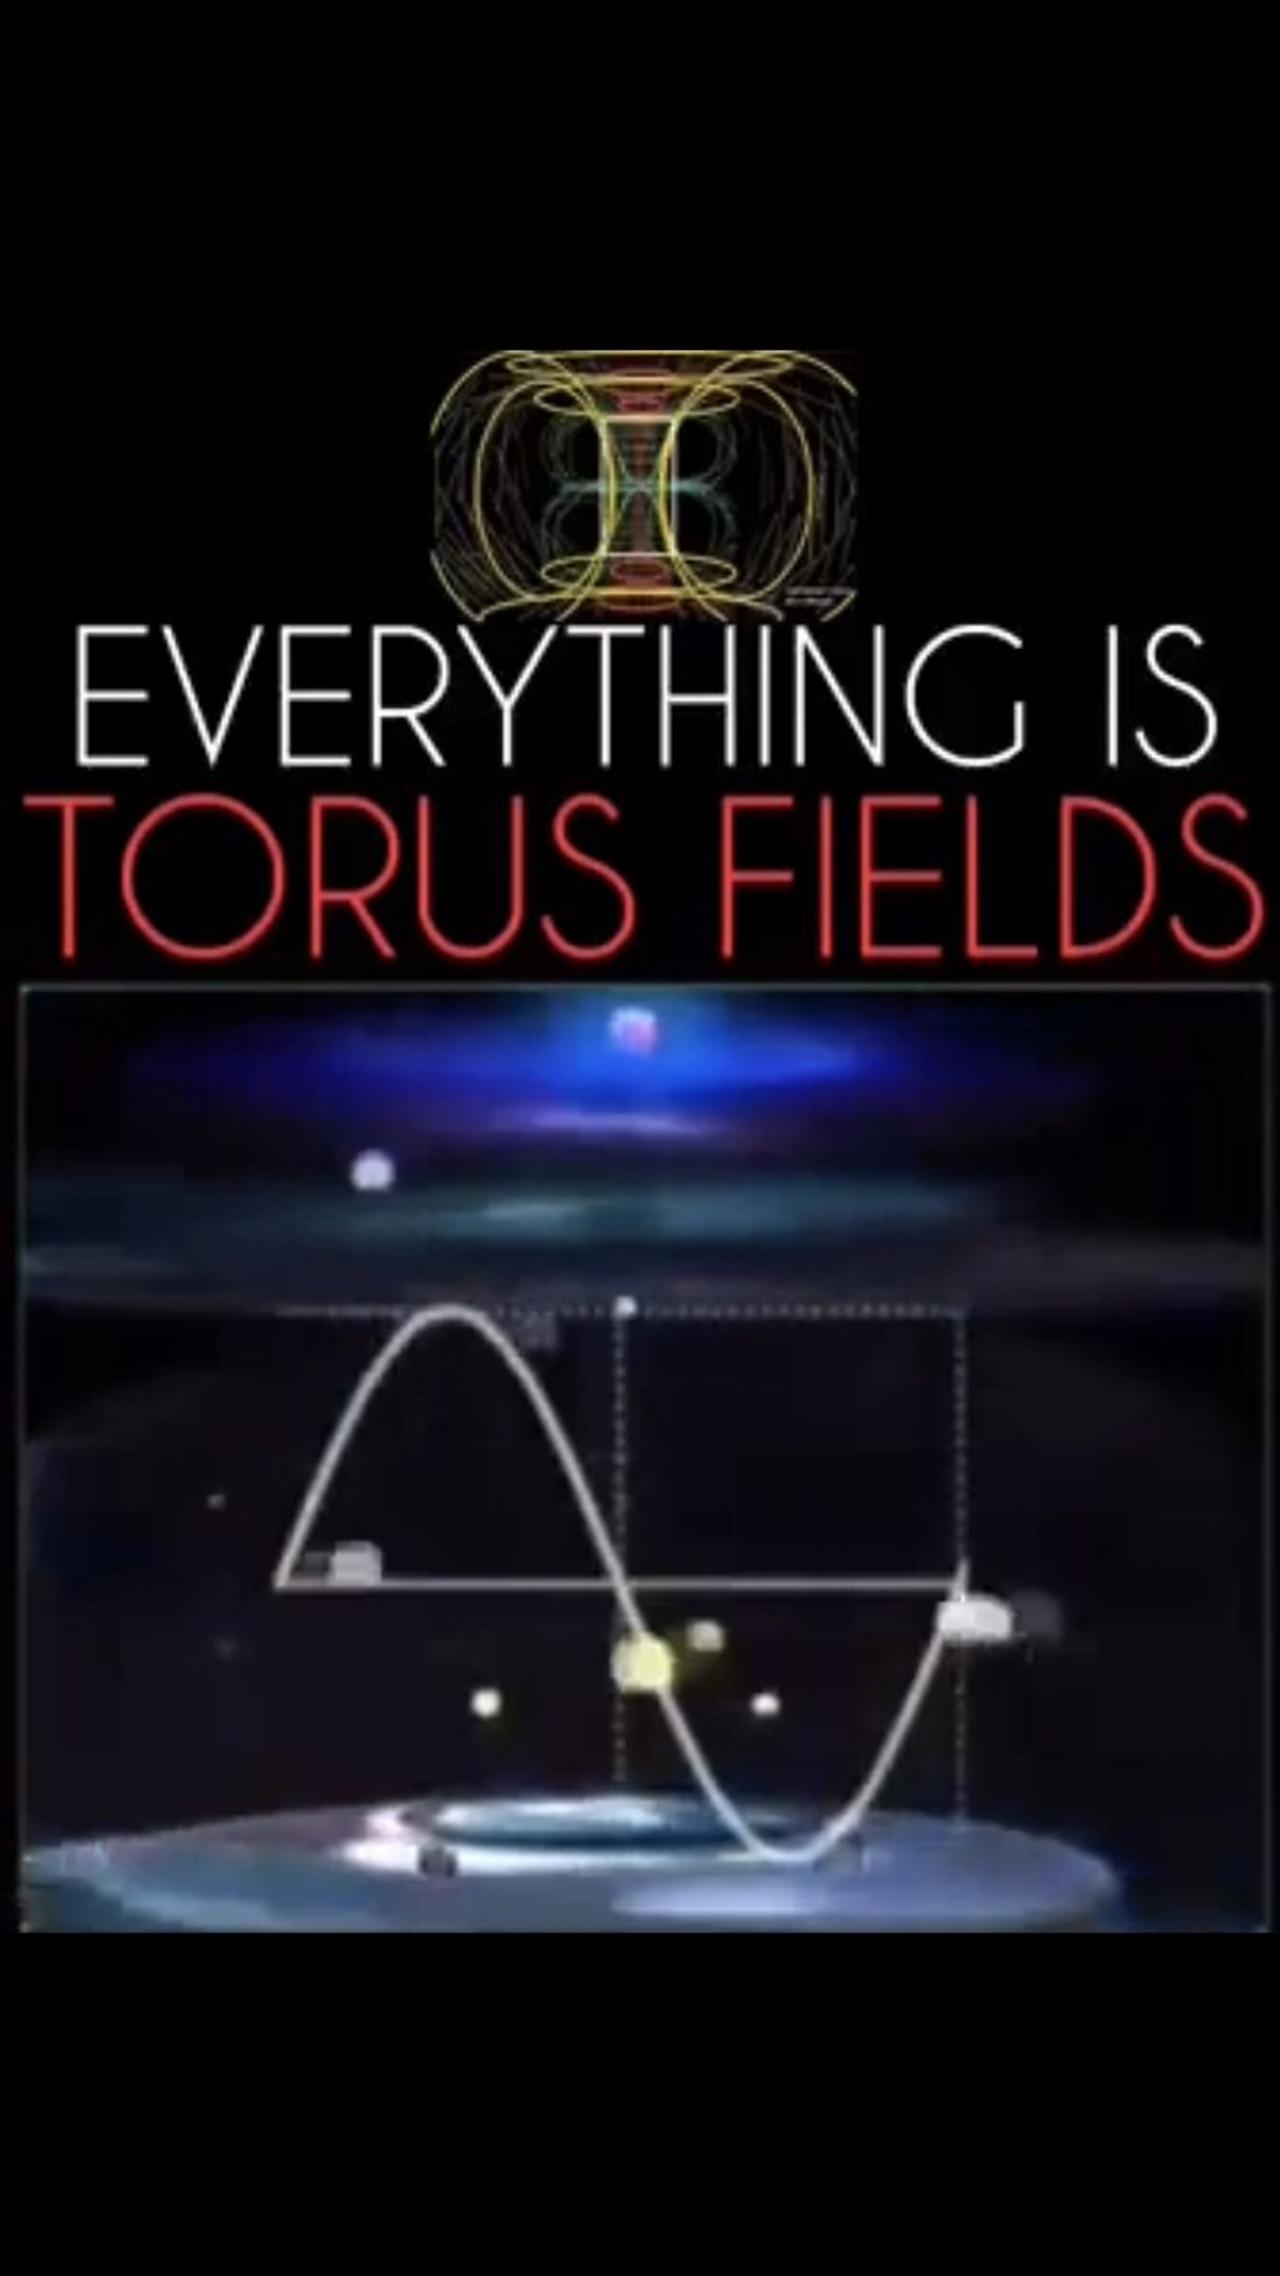 THE TORUS FIELD - Our and Mother GAIA'S Electromagnetic Field